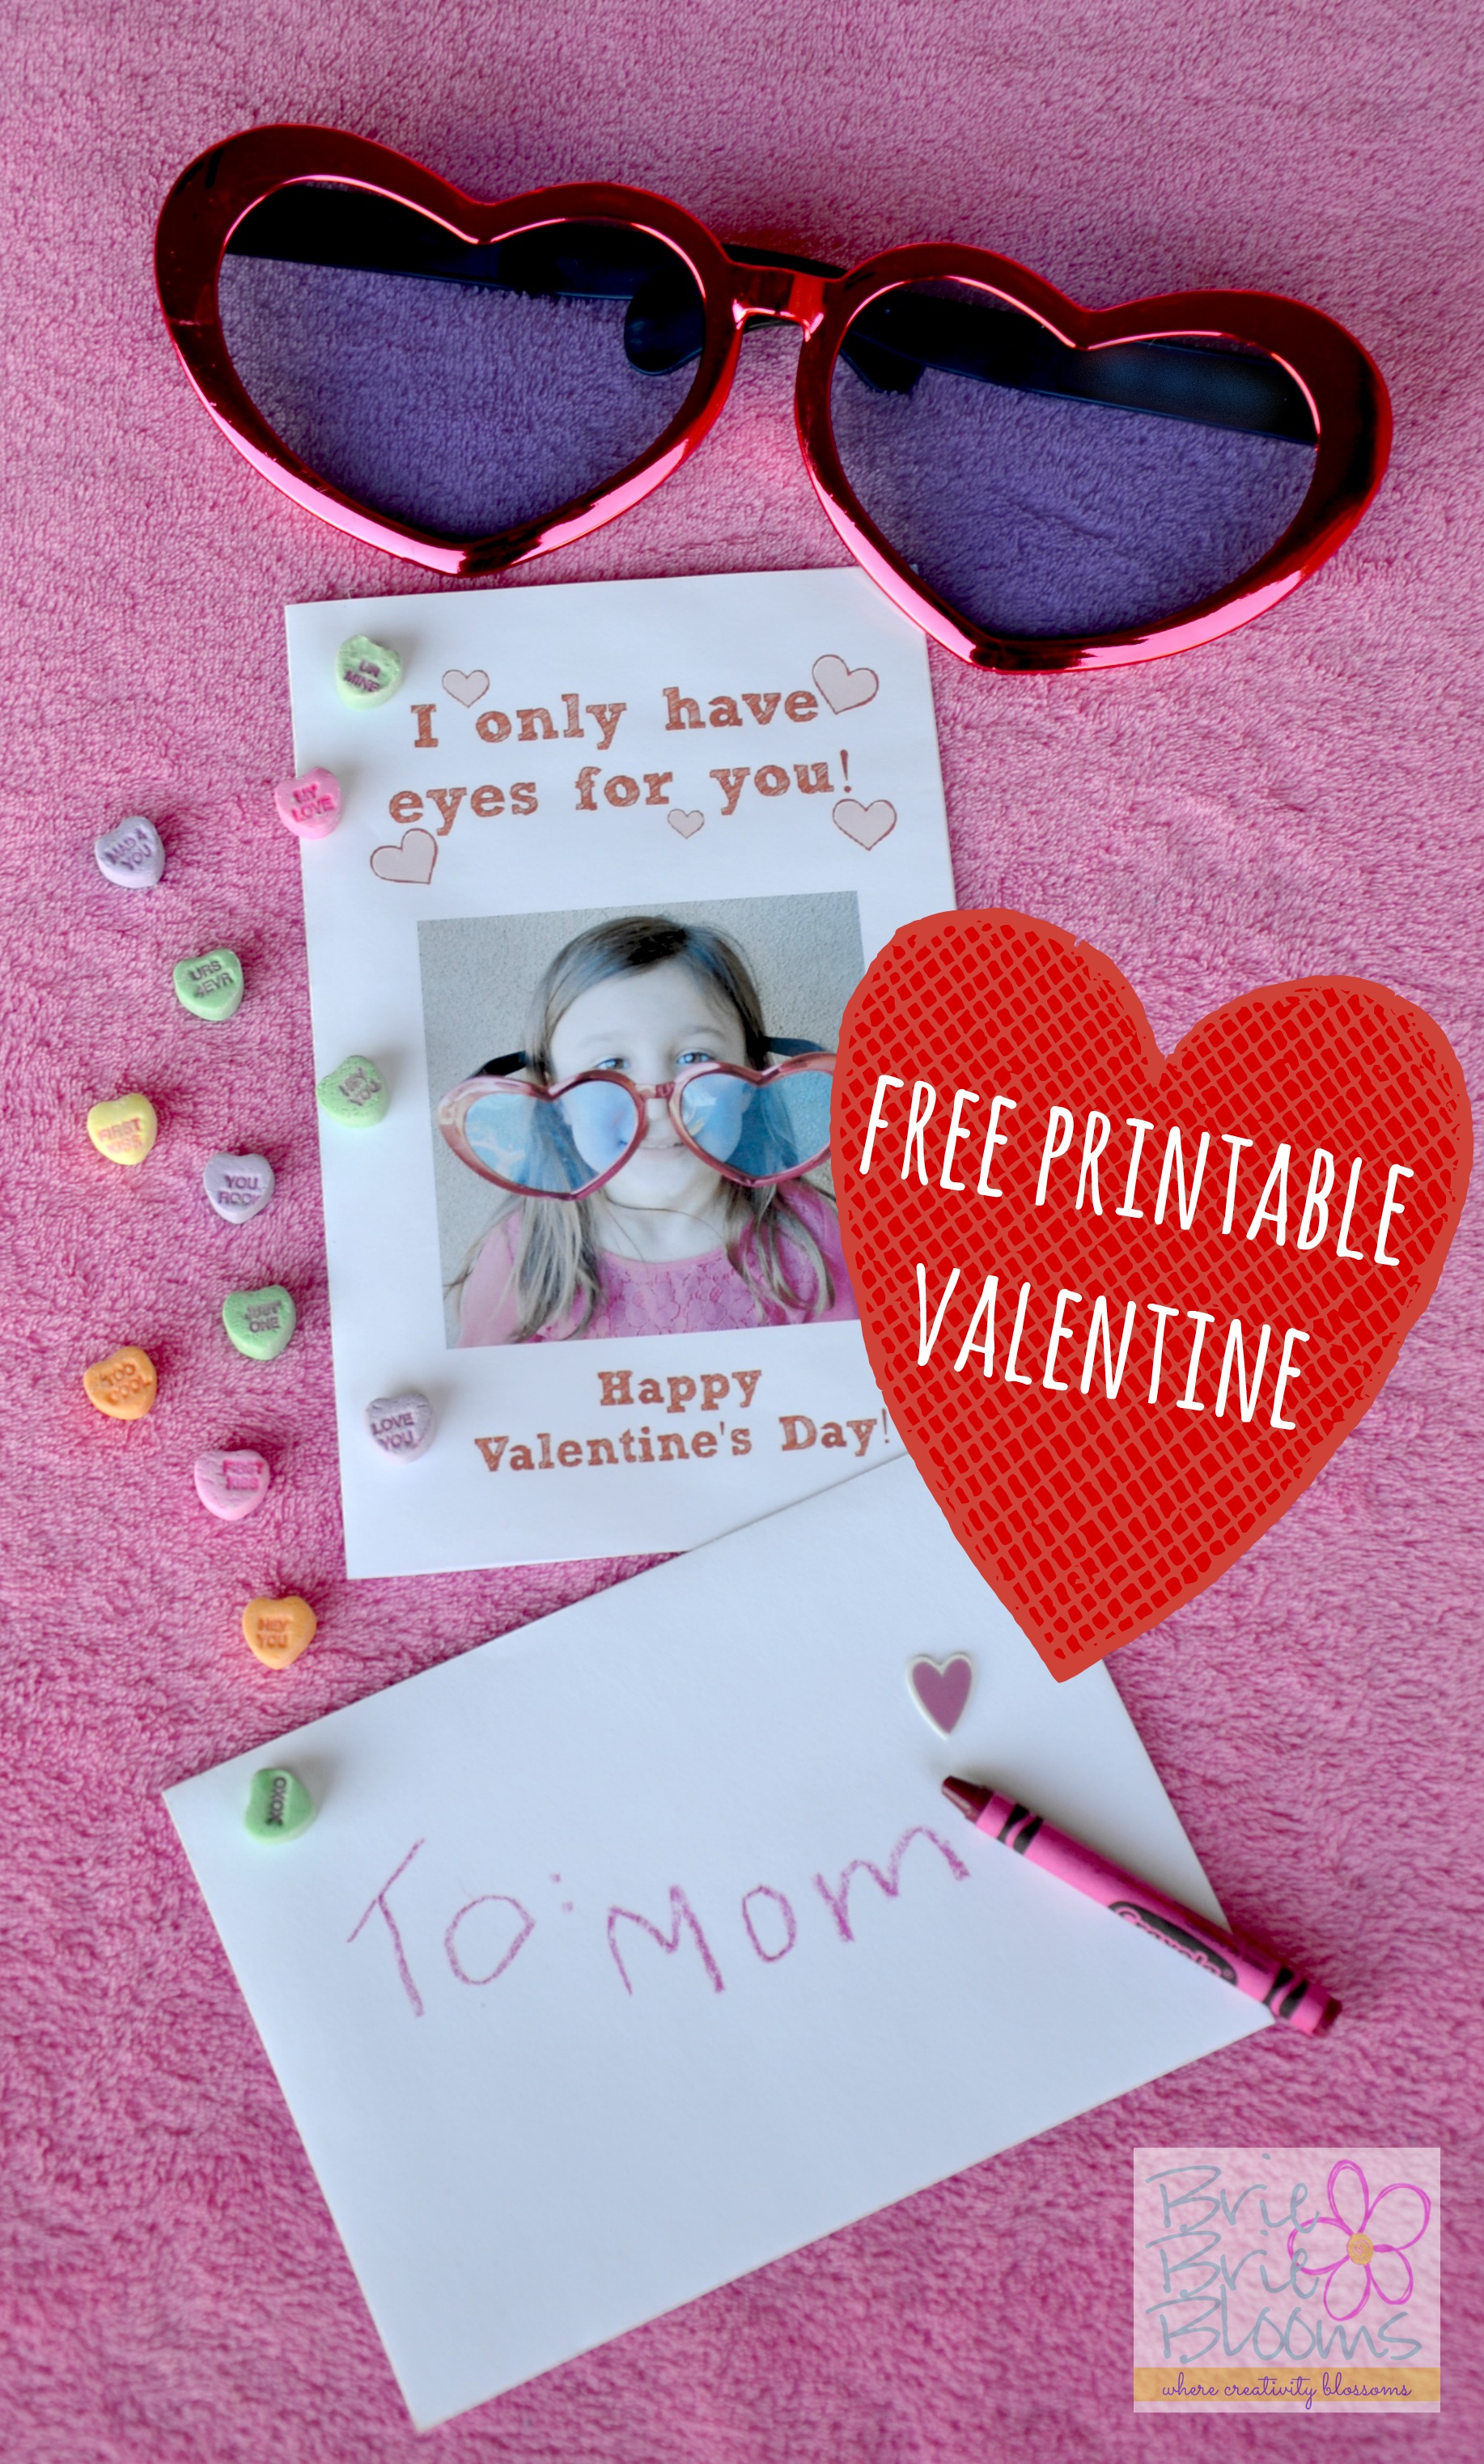 Free Printable Valentine with heart glasses photo